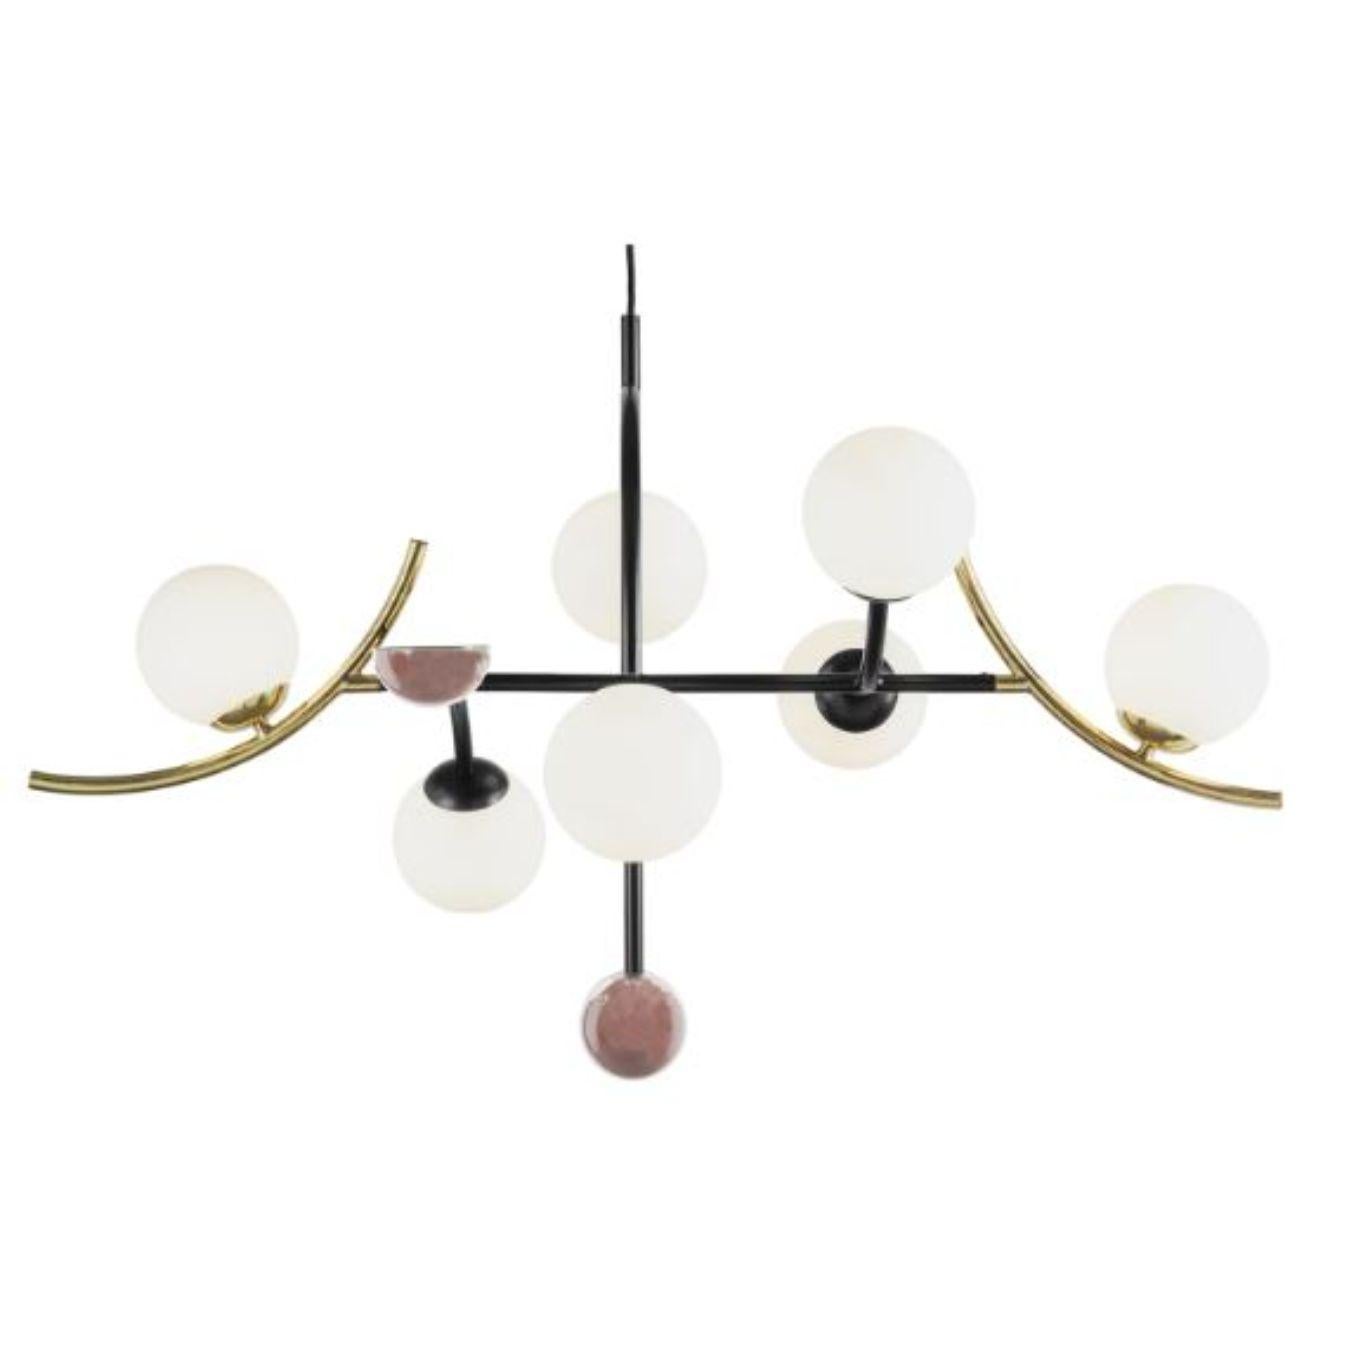 Blossom Helio Suspension lamp by Dooq
Dimensions: W 130 x D 70 x H 80 cm
Materials: lacquered metal, brass/nickel.
Also available in different colors. 

Information:
230V/50Hz
7 x max. G9
4W LED

120V/60Hz
7 x max. G9
4W LED

Cable: 59”/1,5m

All